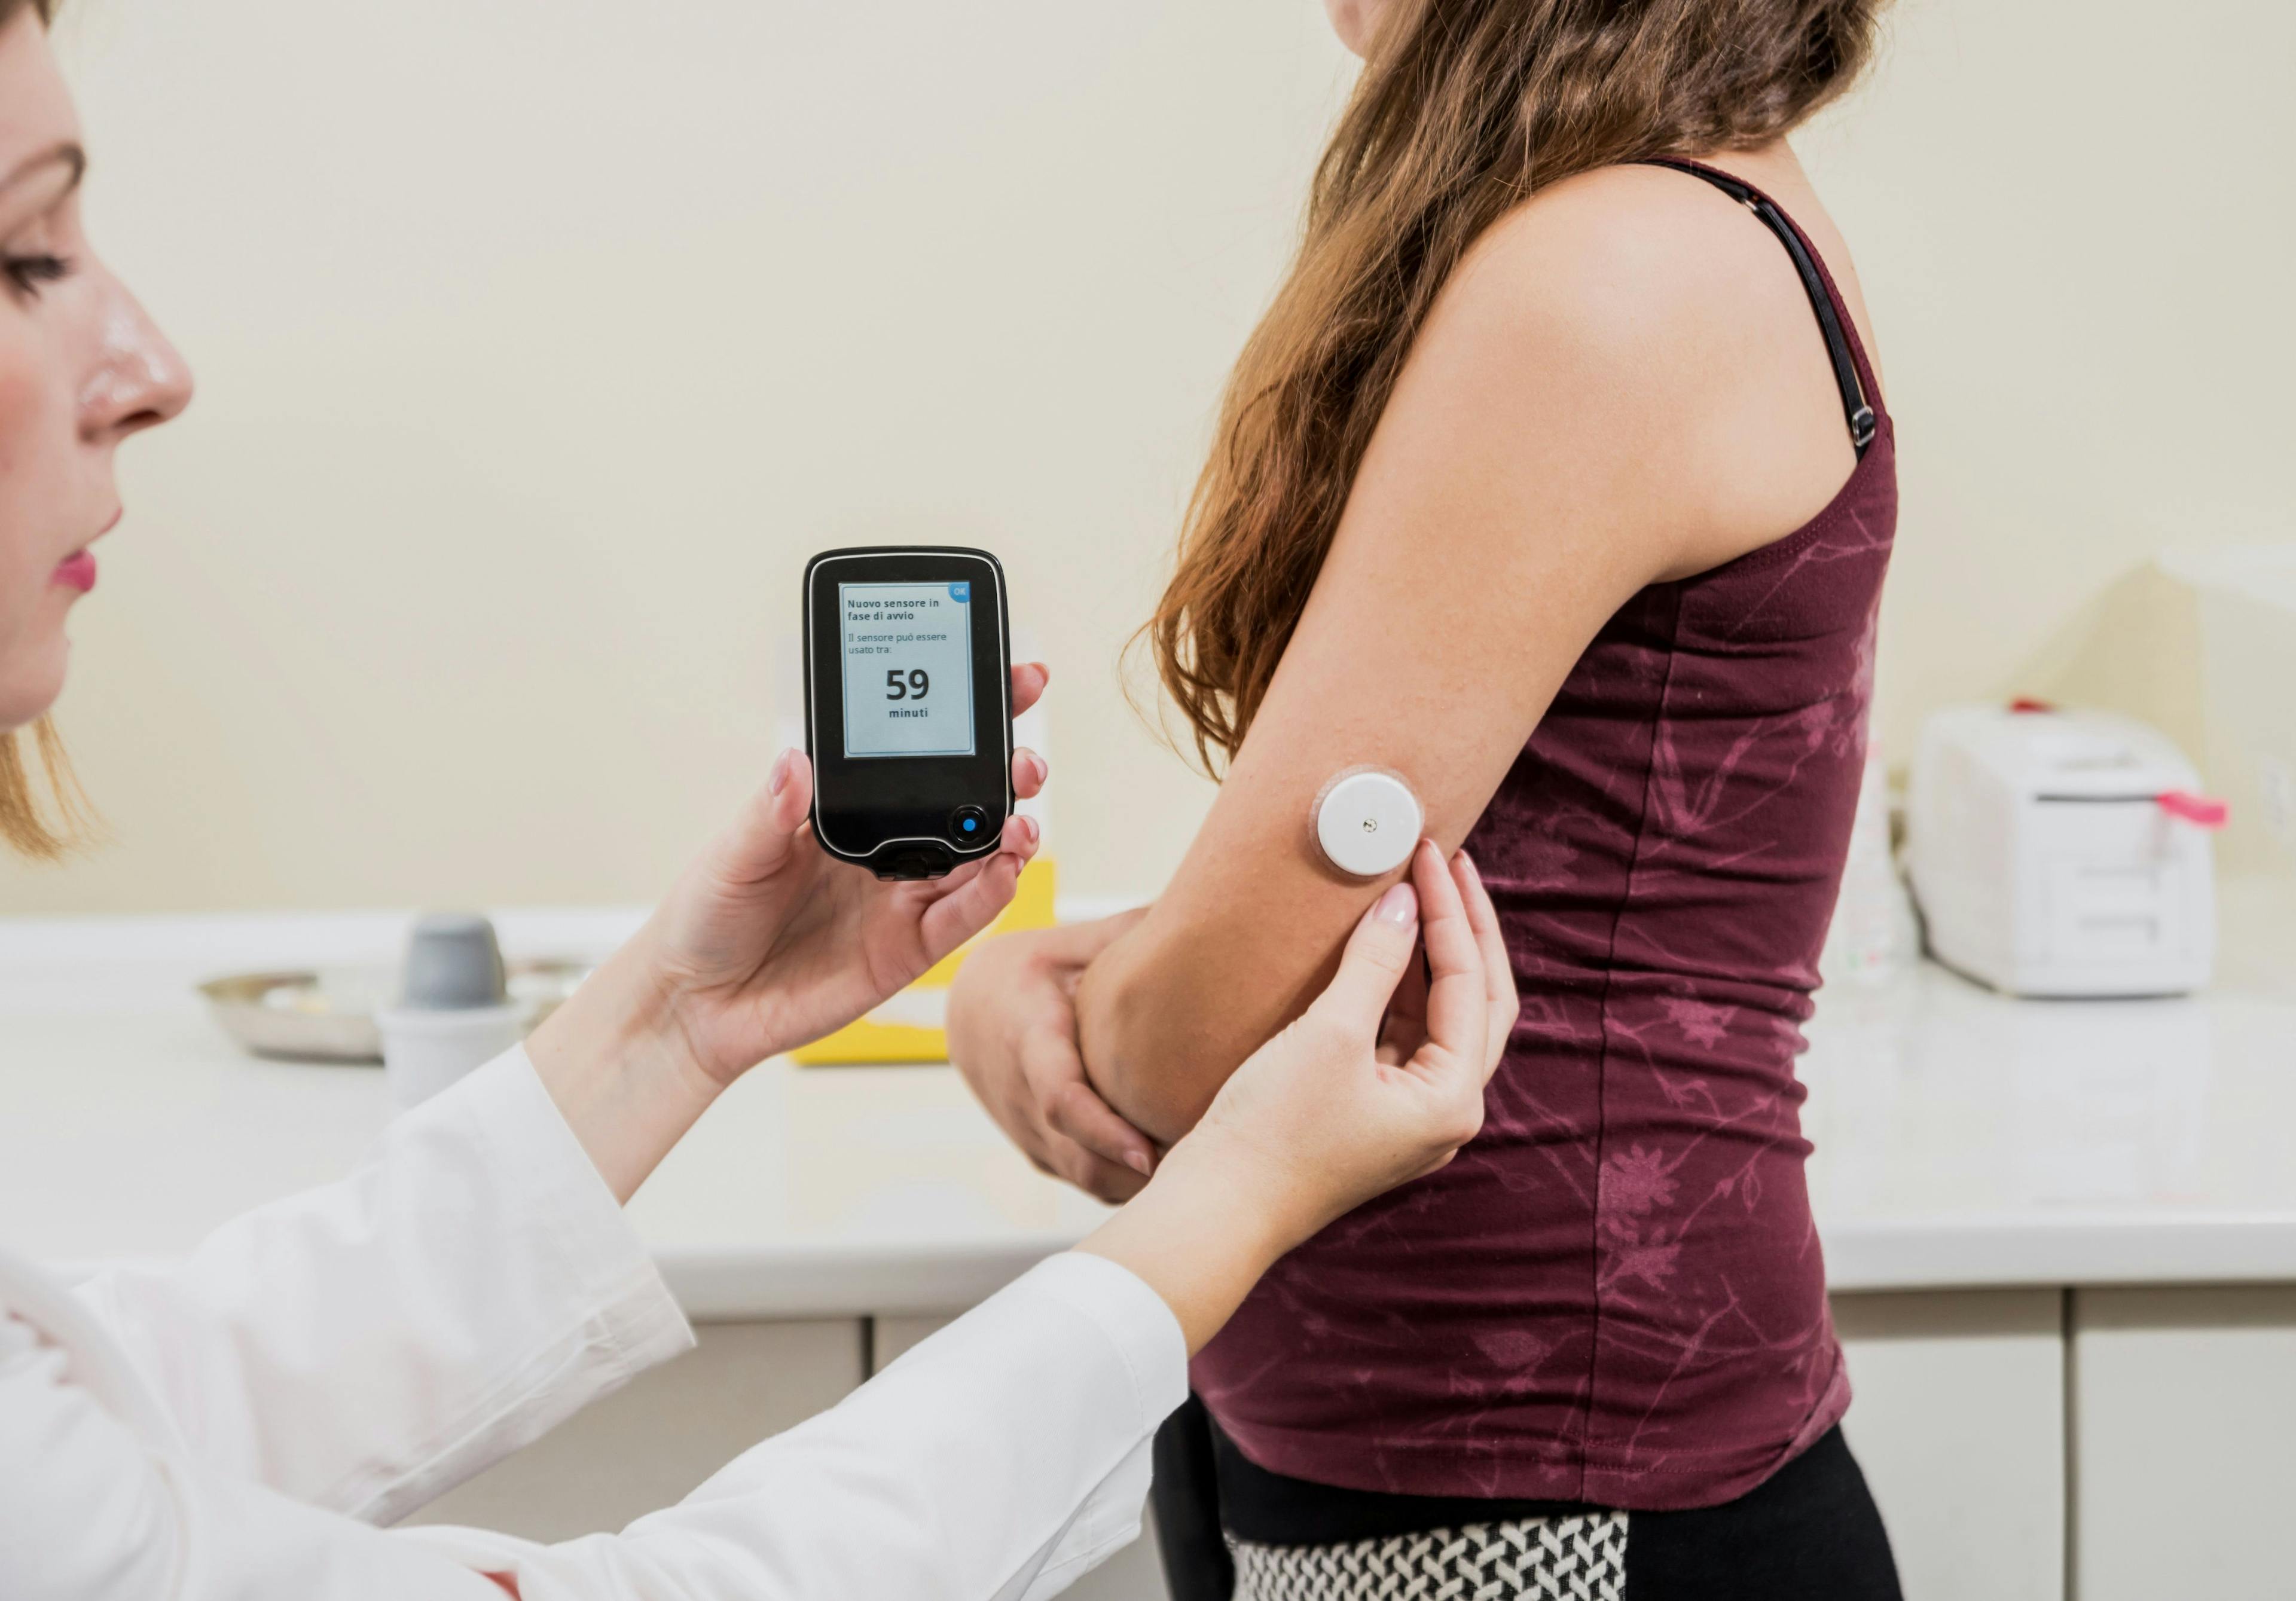 Community Pharmacists Could Help Patients Control Diabetes Through Remote CGM Monitoring